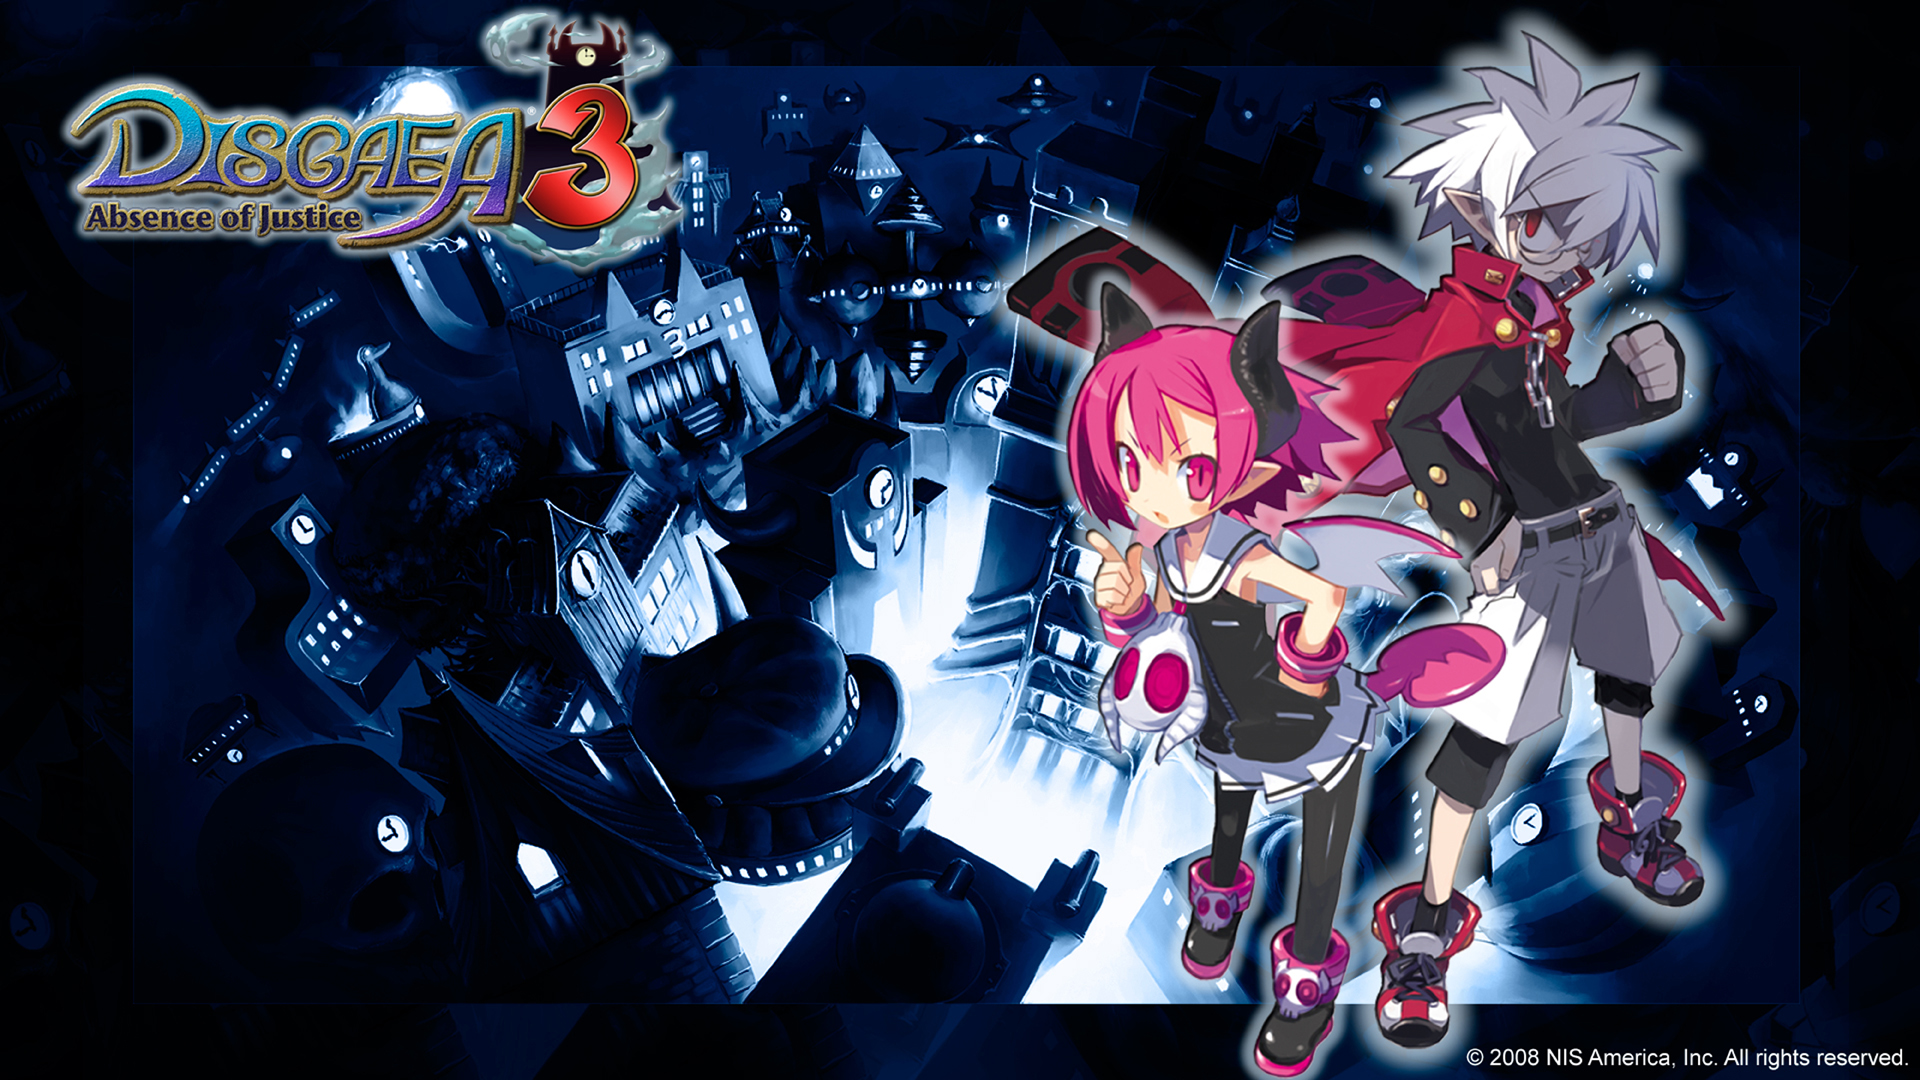 Disgaea Absence Of Justice HD Wallpaper